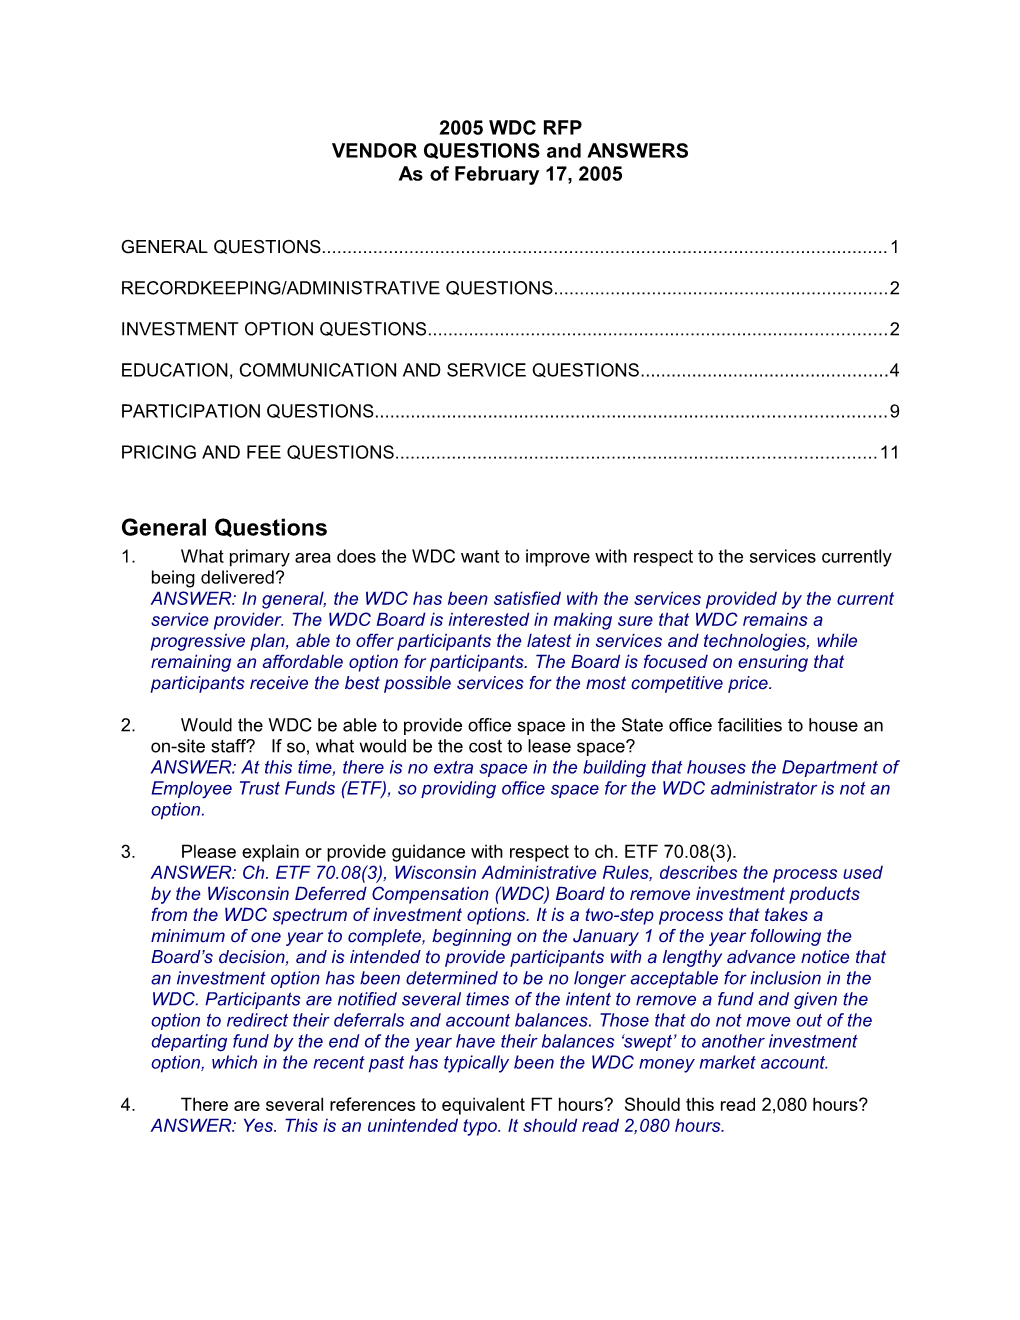 2005 Wdc Rfp Vendor Questions and Answers